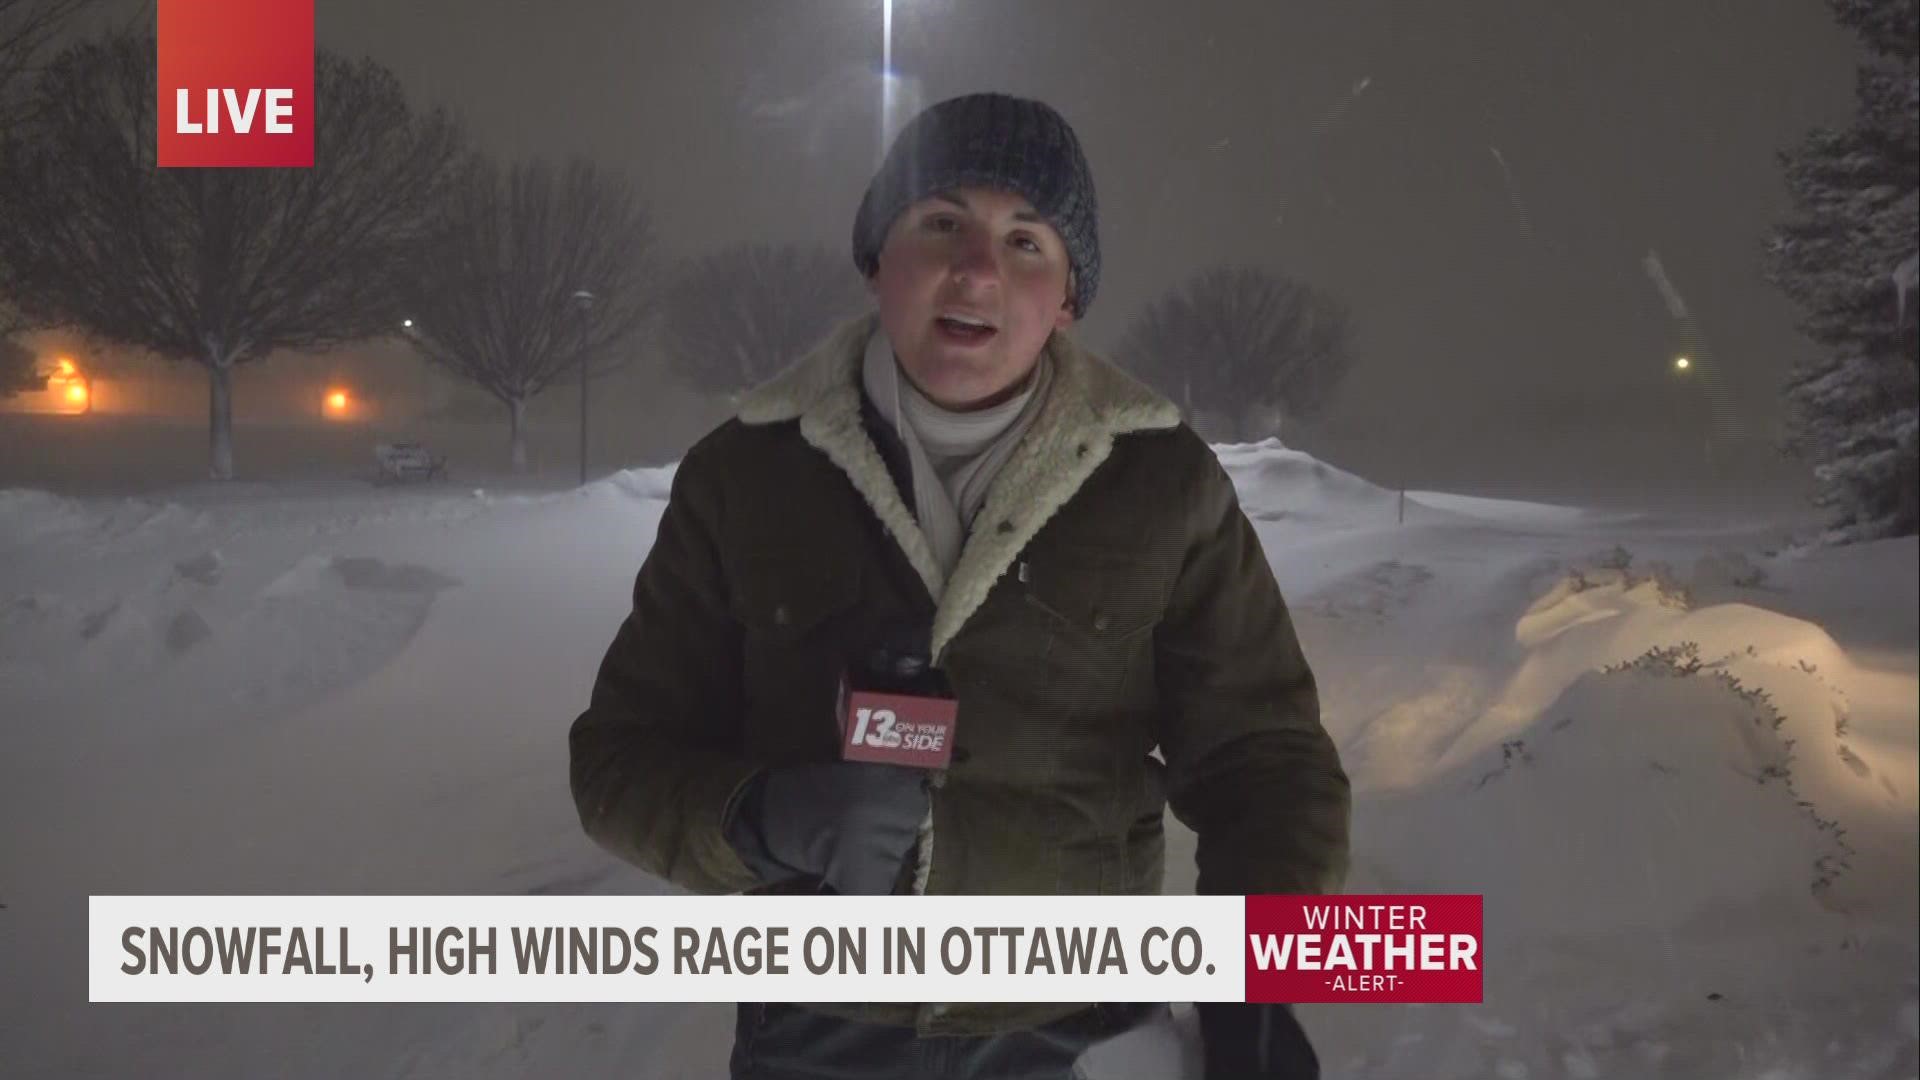 Snowfall and high winds rage on in Ottawa County.